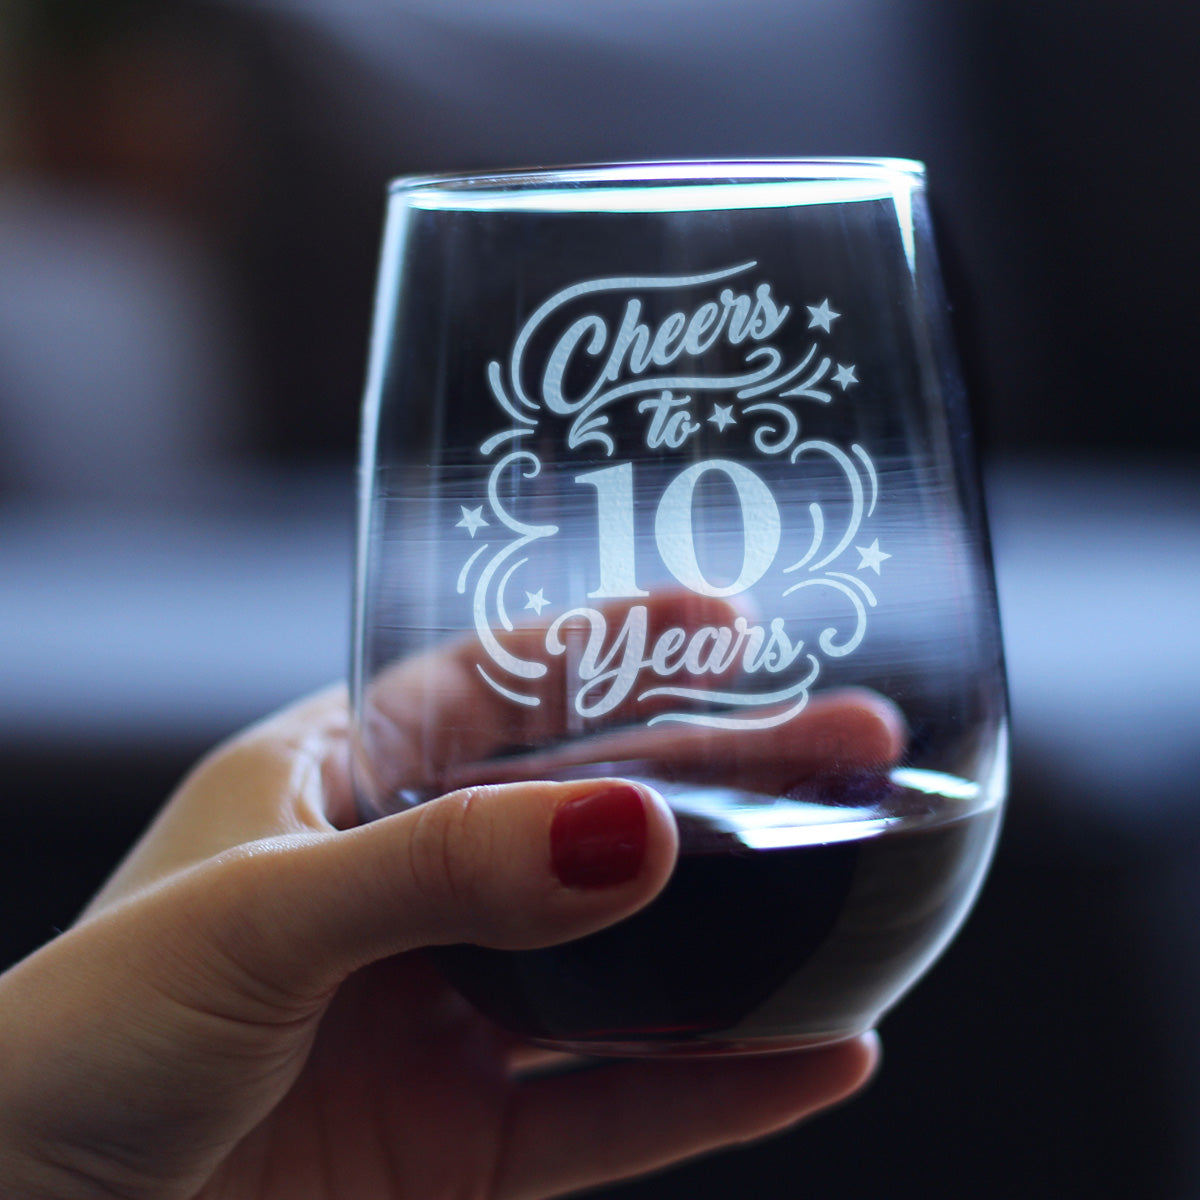 Cheers to 10 Years - Stemless Wine Glass Gifts for Women &amp; Men - 10th Anniversary Party Decor - Large 17 Oz Glass